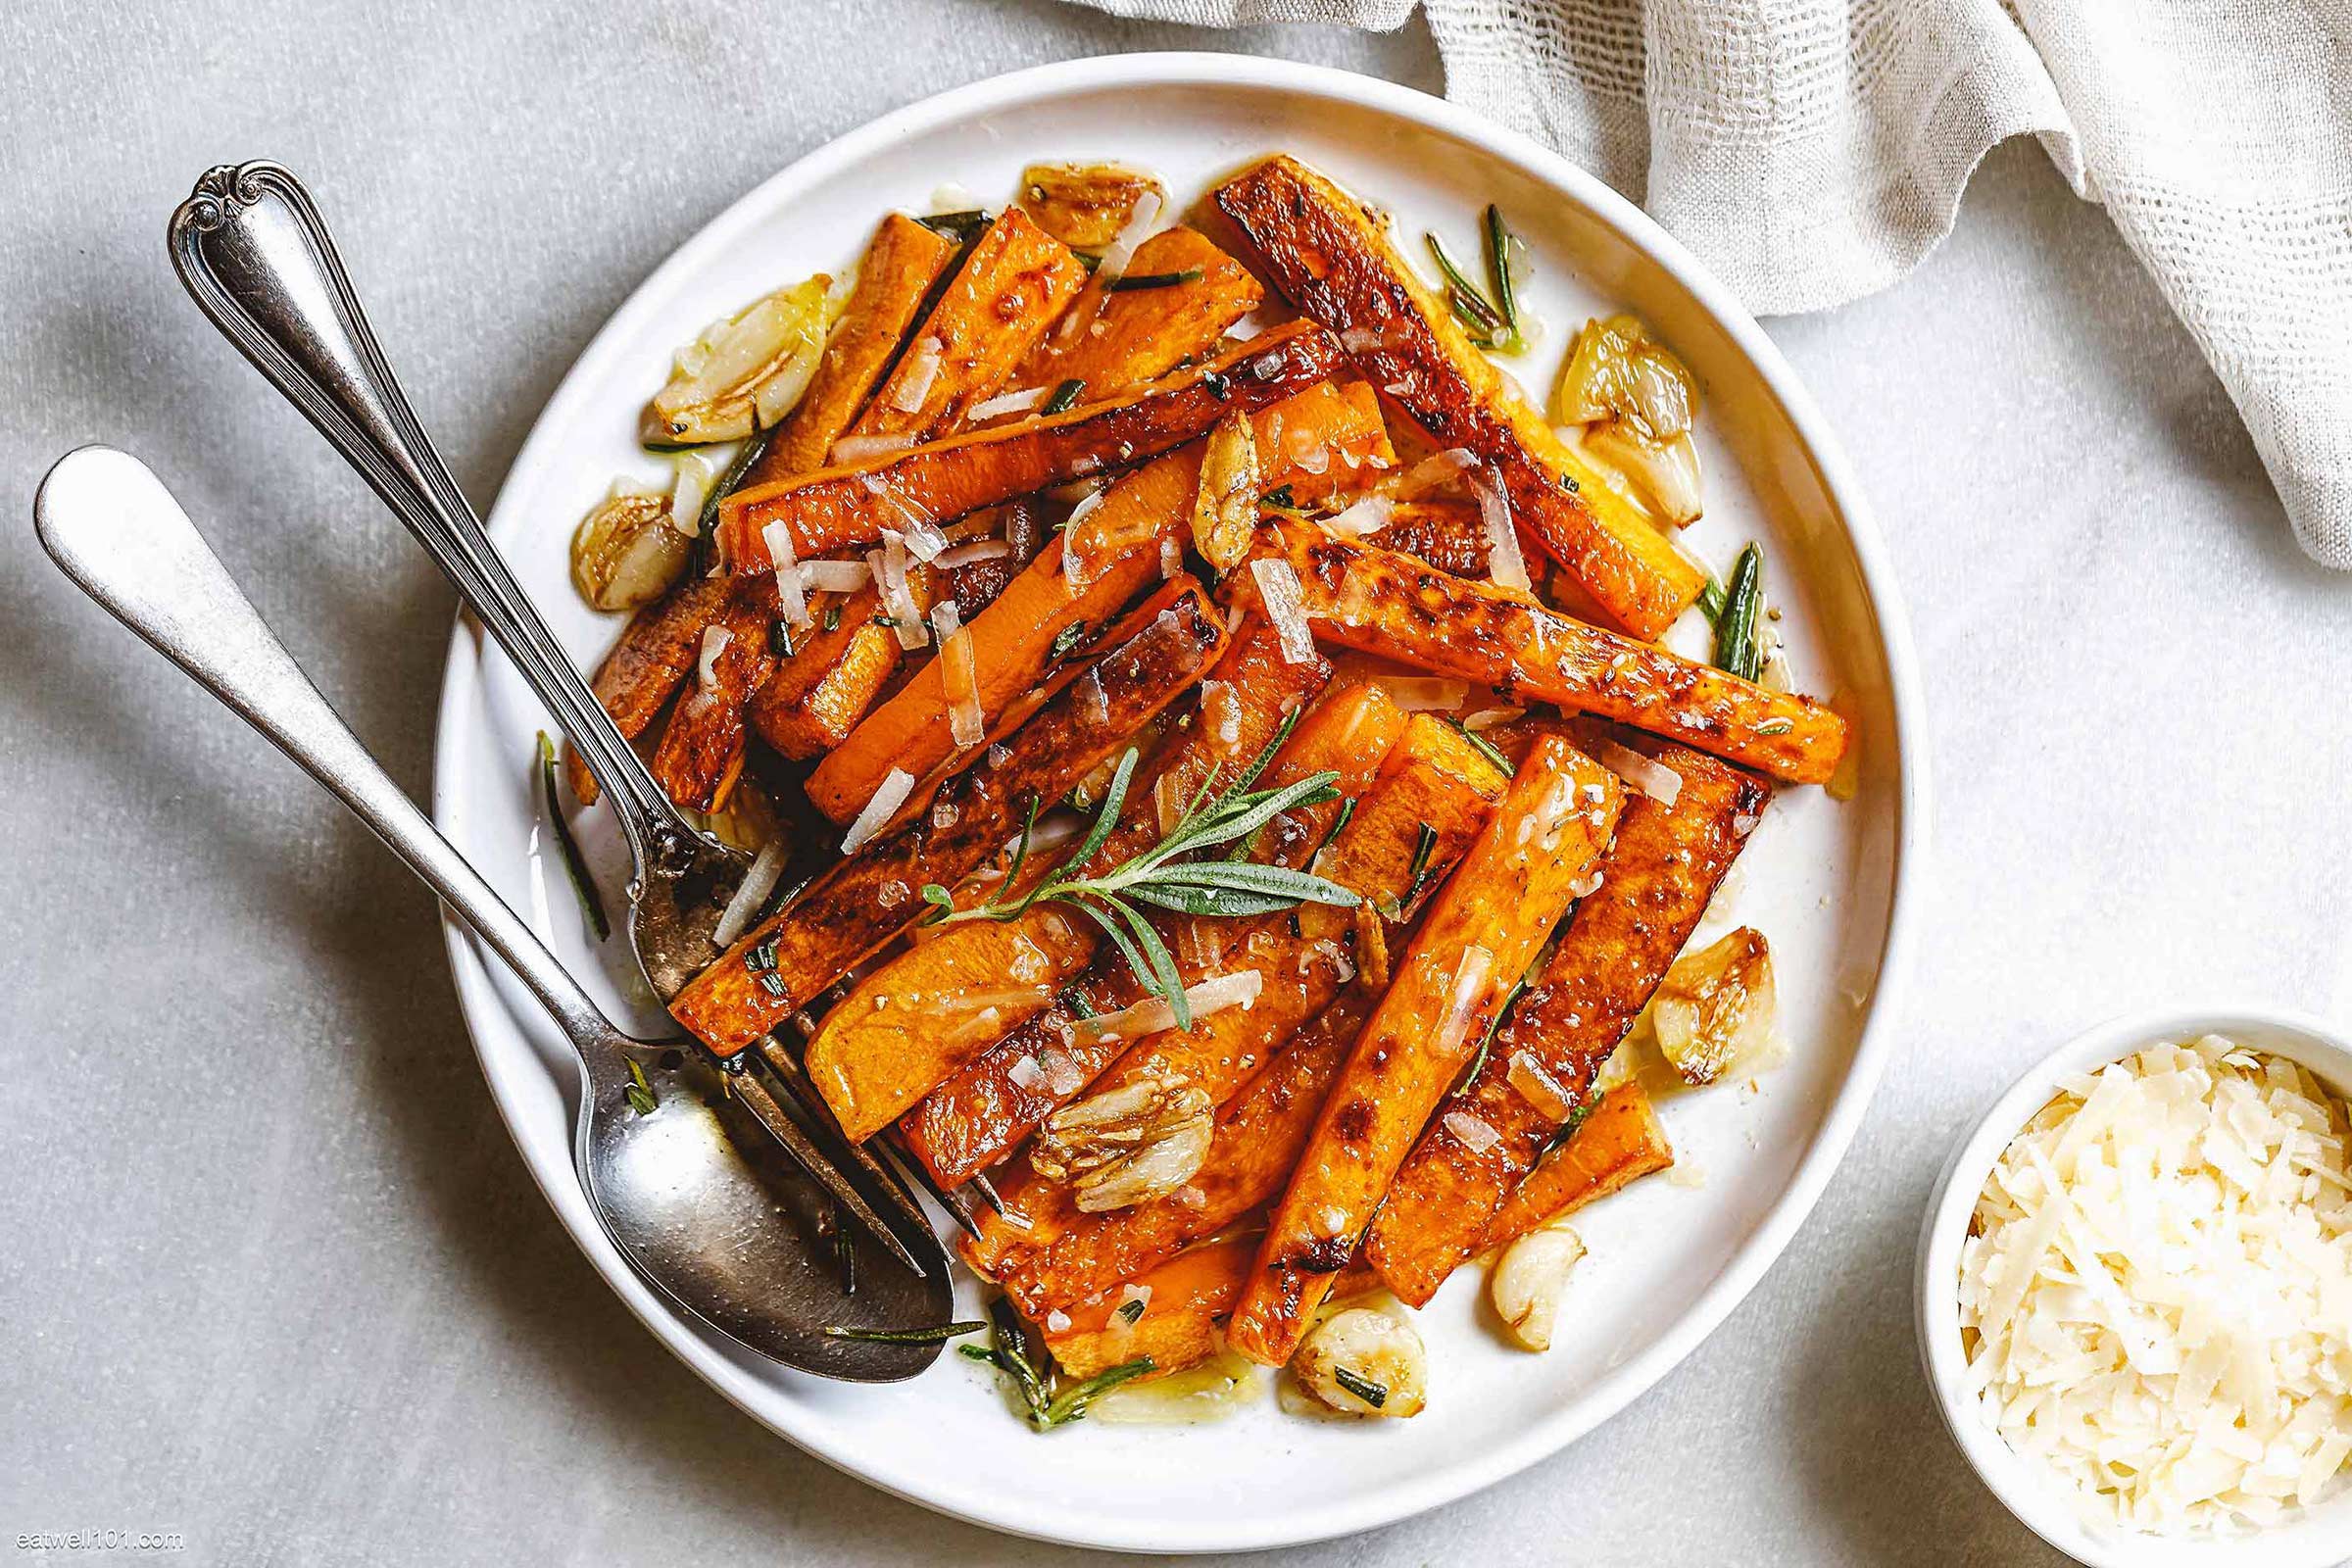 Sauteed Butternut Squash with Garlic Rosemary Butter